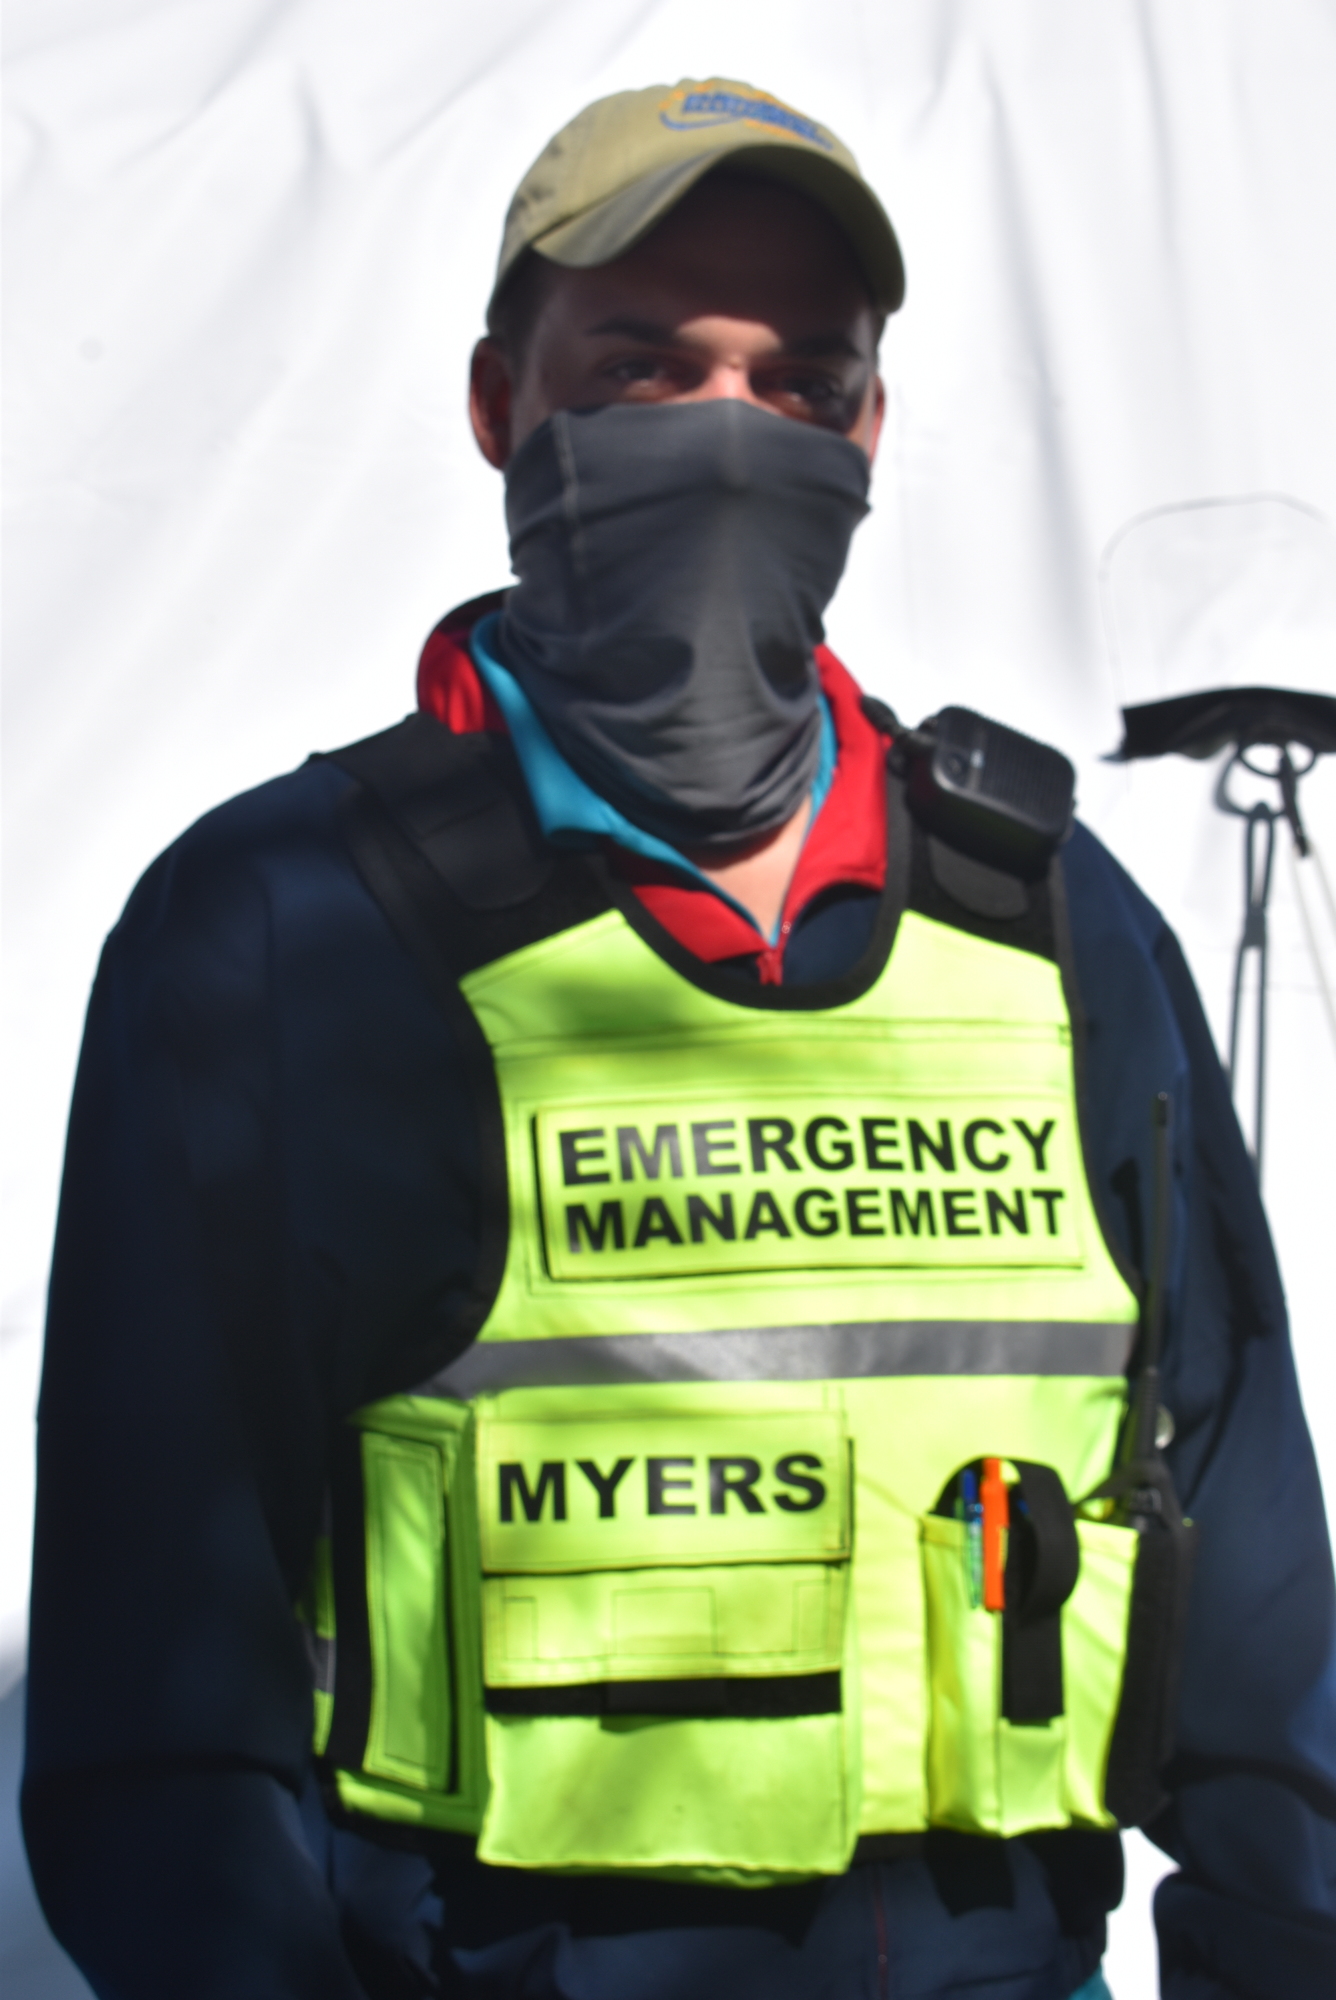 Matthew Myers is a coordinator for the Manatee County Emergency Management Division, which is currently balancing responsibilities between COVID-19 and hurricane preparation.